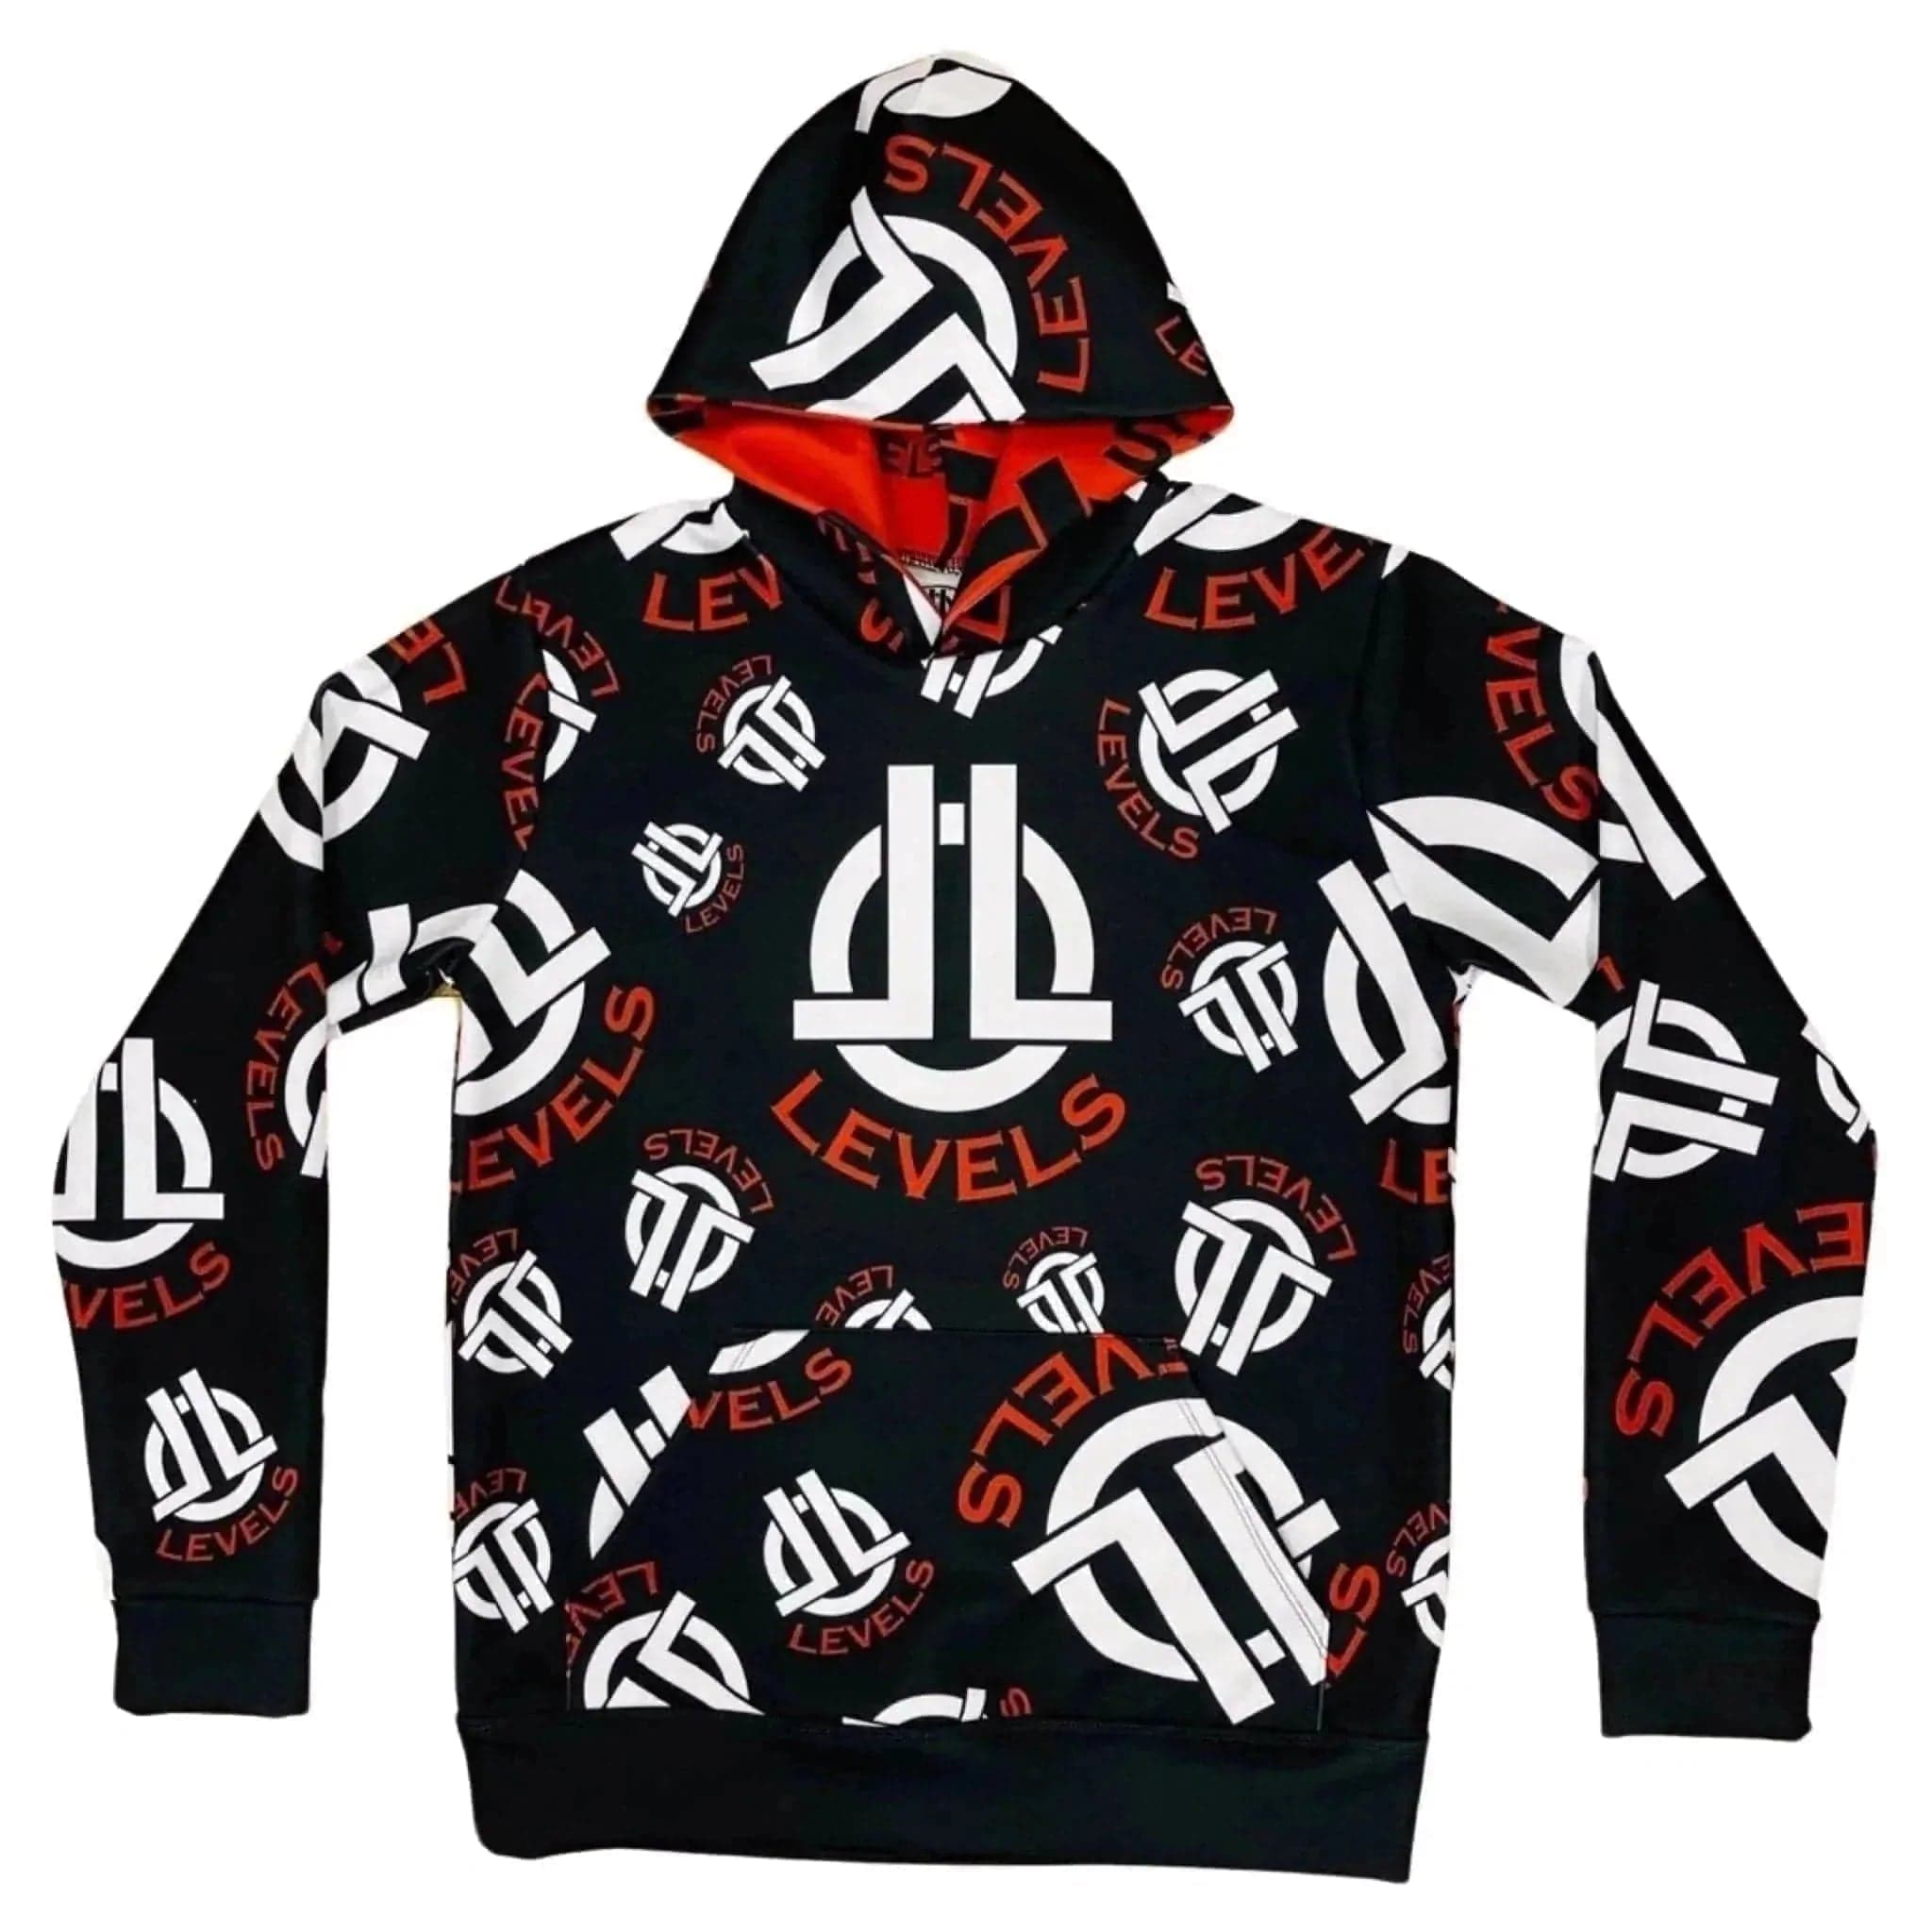 LVLS House of Hoodies, LLC Apparel & Accessories DYE SUBLIMATION HOODIE (BLACK/RED) 2ND EDITION